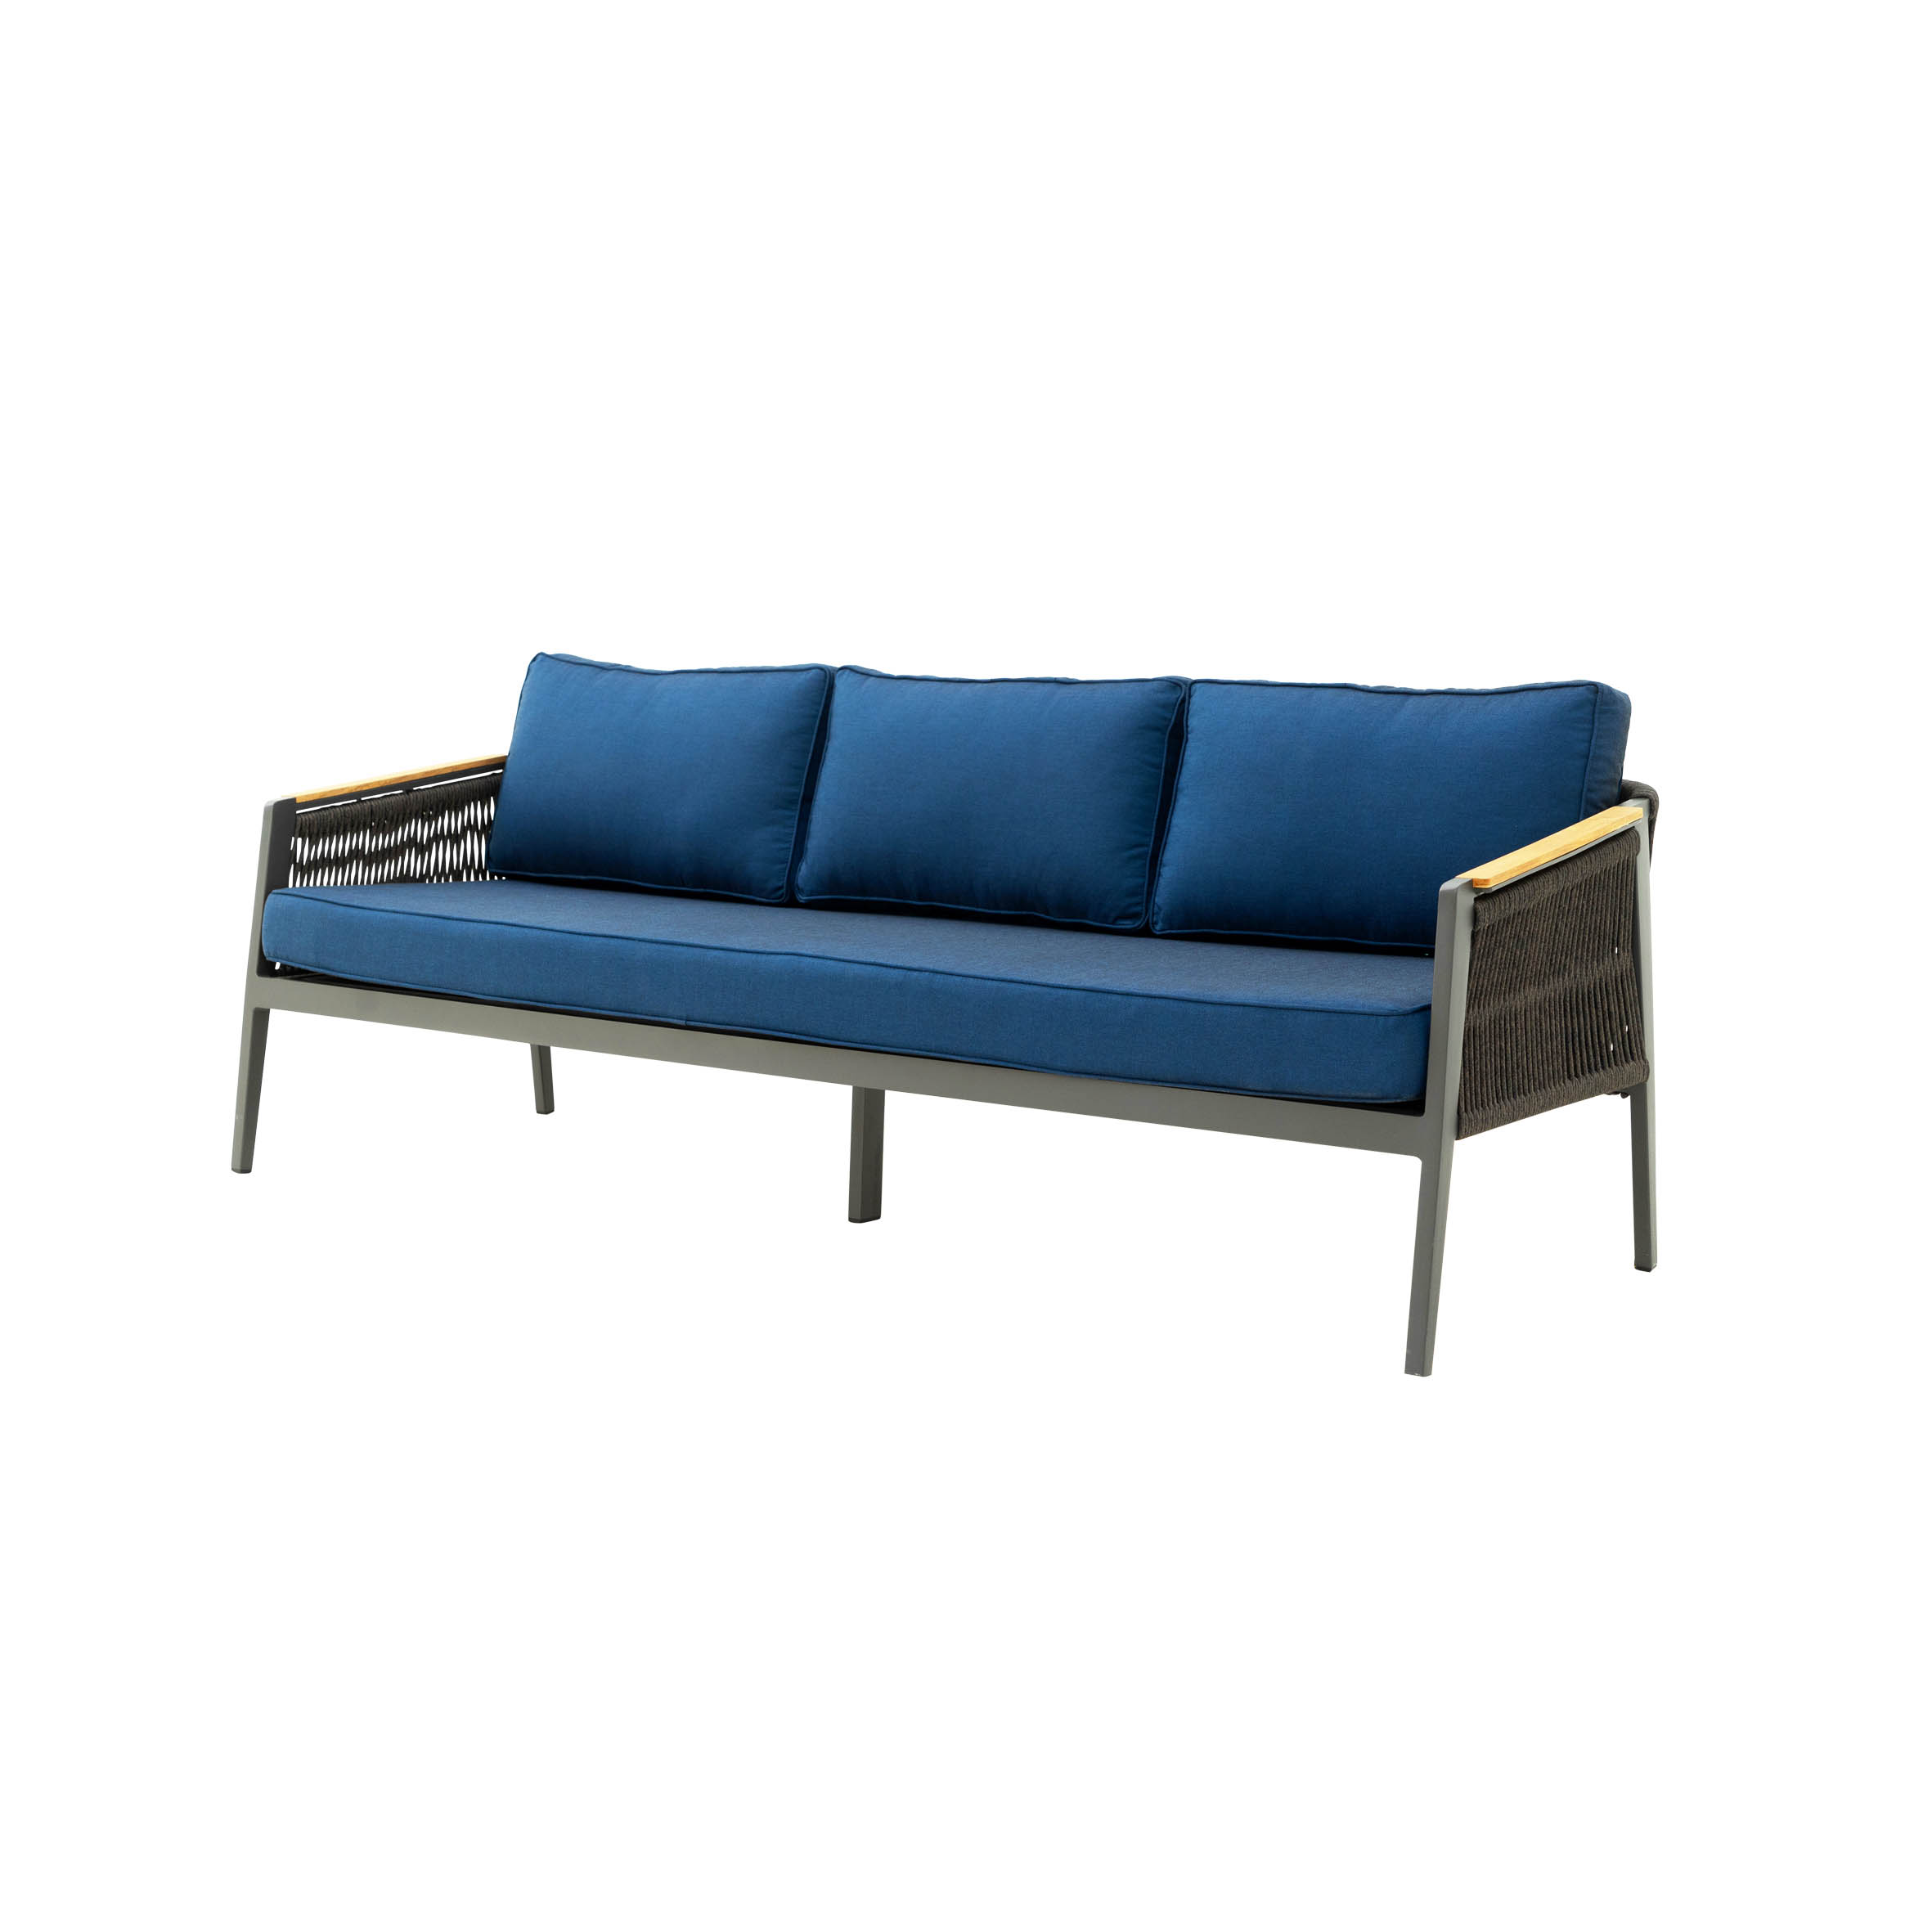 Norland rope 3-seat sofa S1